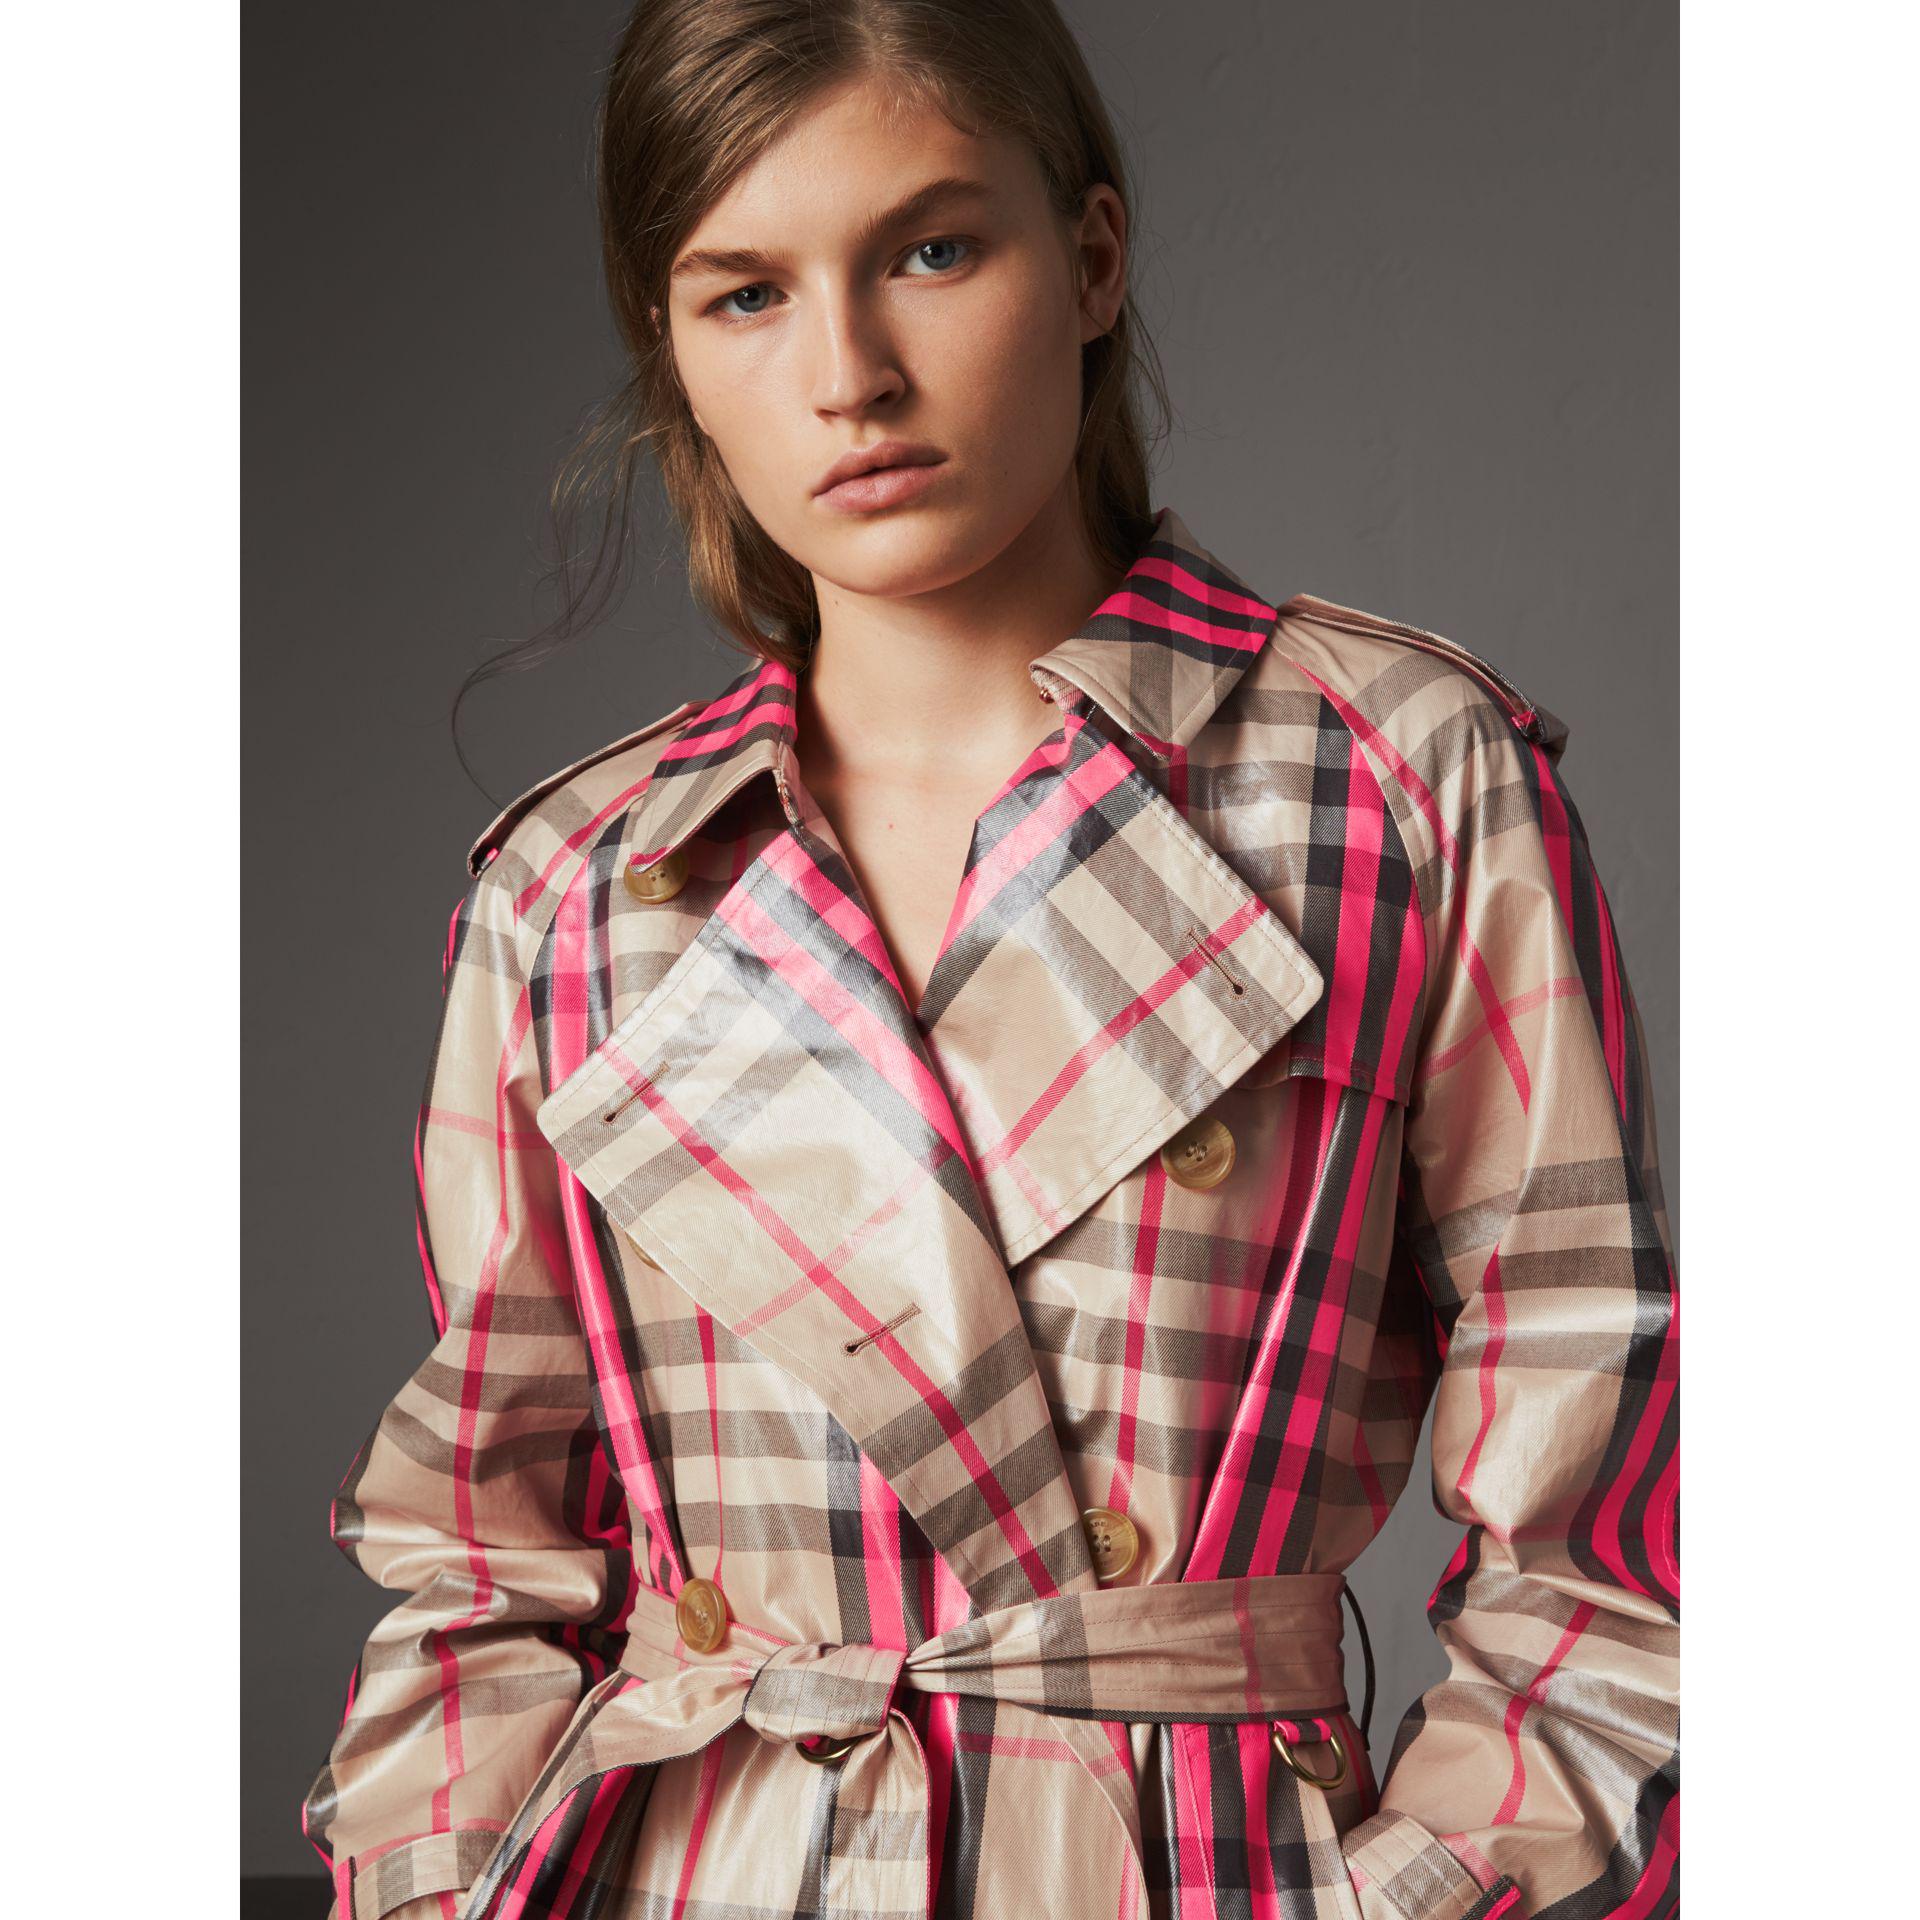 Burberry Laminated Check Trench Coat in Neon Pink (Pink) - Lyst